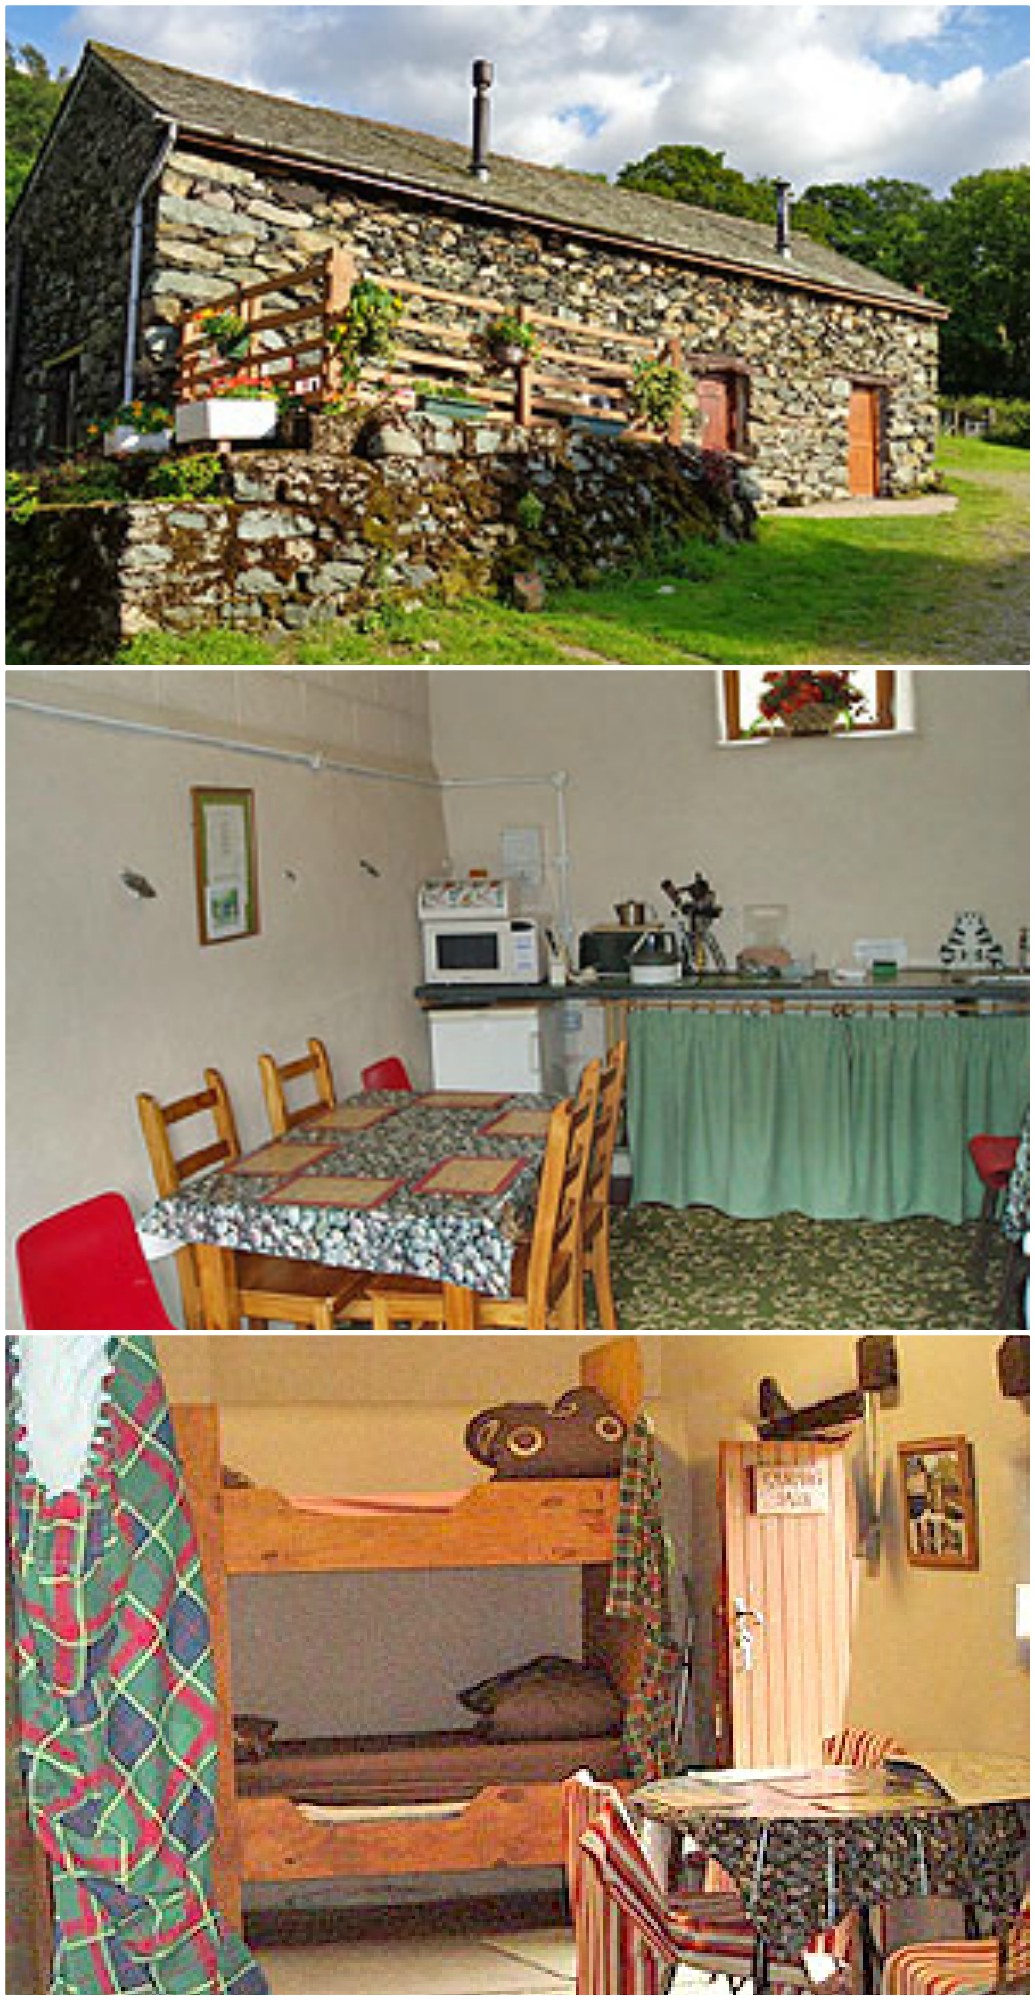 camping barn, can be B & B by request - sleeps 10